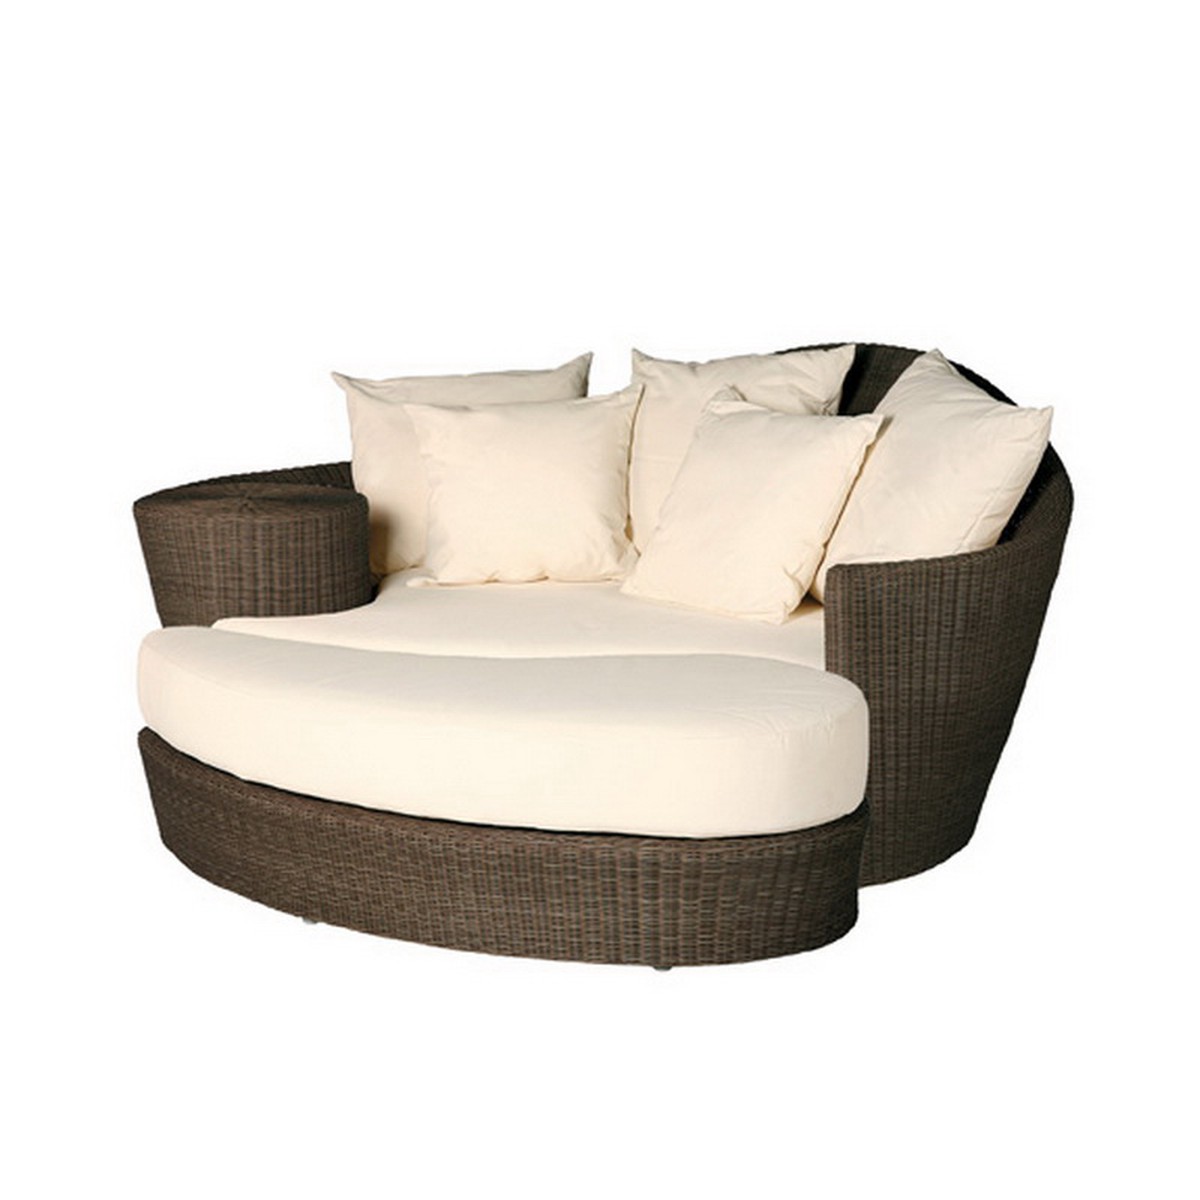 Barlow Tyrie Dune Ensemble Dune Daybed & Repose pied Java inclus coussins 800035/ 800070/800050 Blanc albâtre 